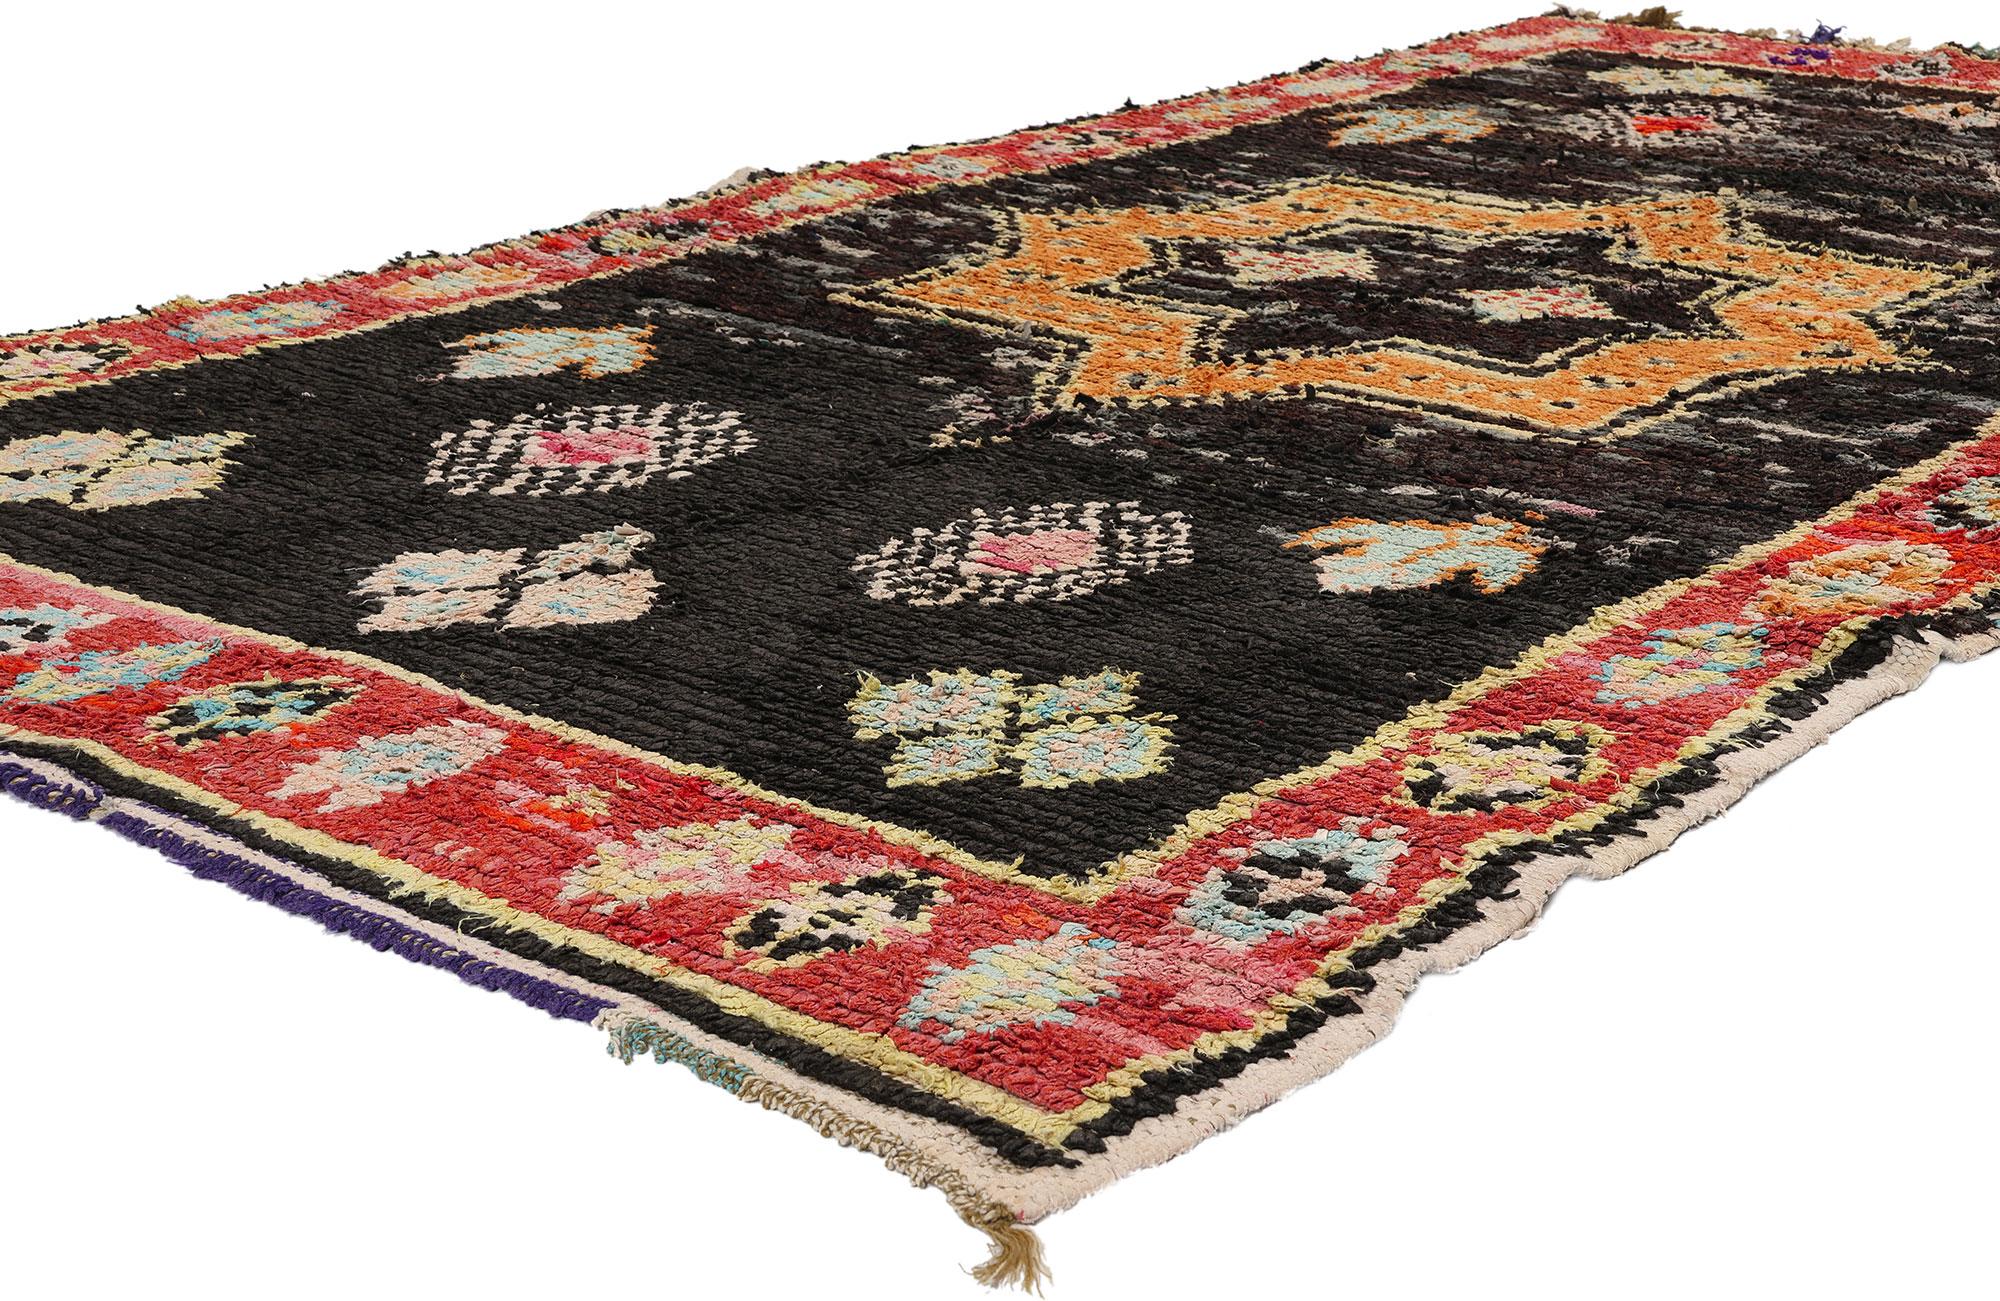 21834 Vintage Black Moroccan Azilal Rag Rug, 04'04 x 07'10. Azilal rag rugs, or Azilal Boucherouite rugs, represent sustainable craftsmanship from the Azilal region in the Atlas Mountains of Morocco. Handwoven by Berber artisans using recycled